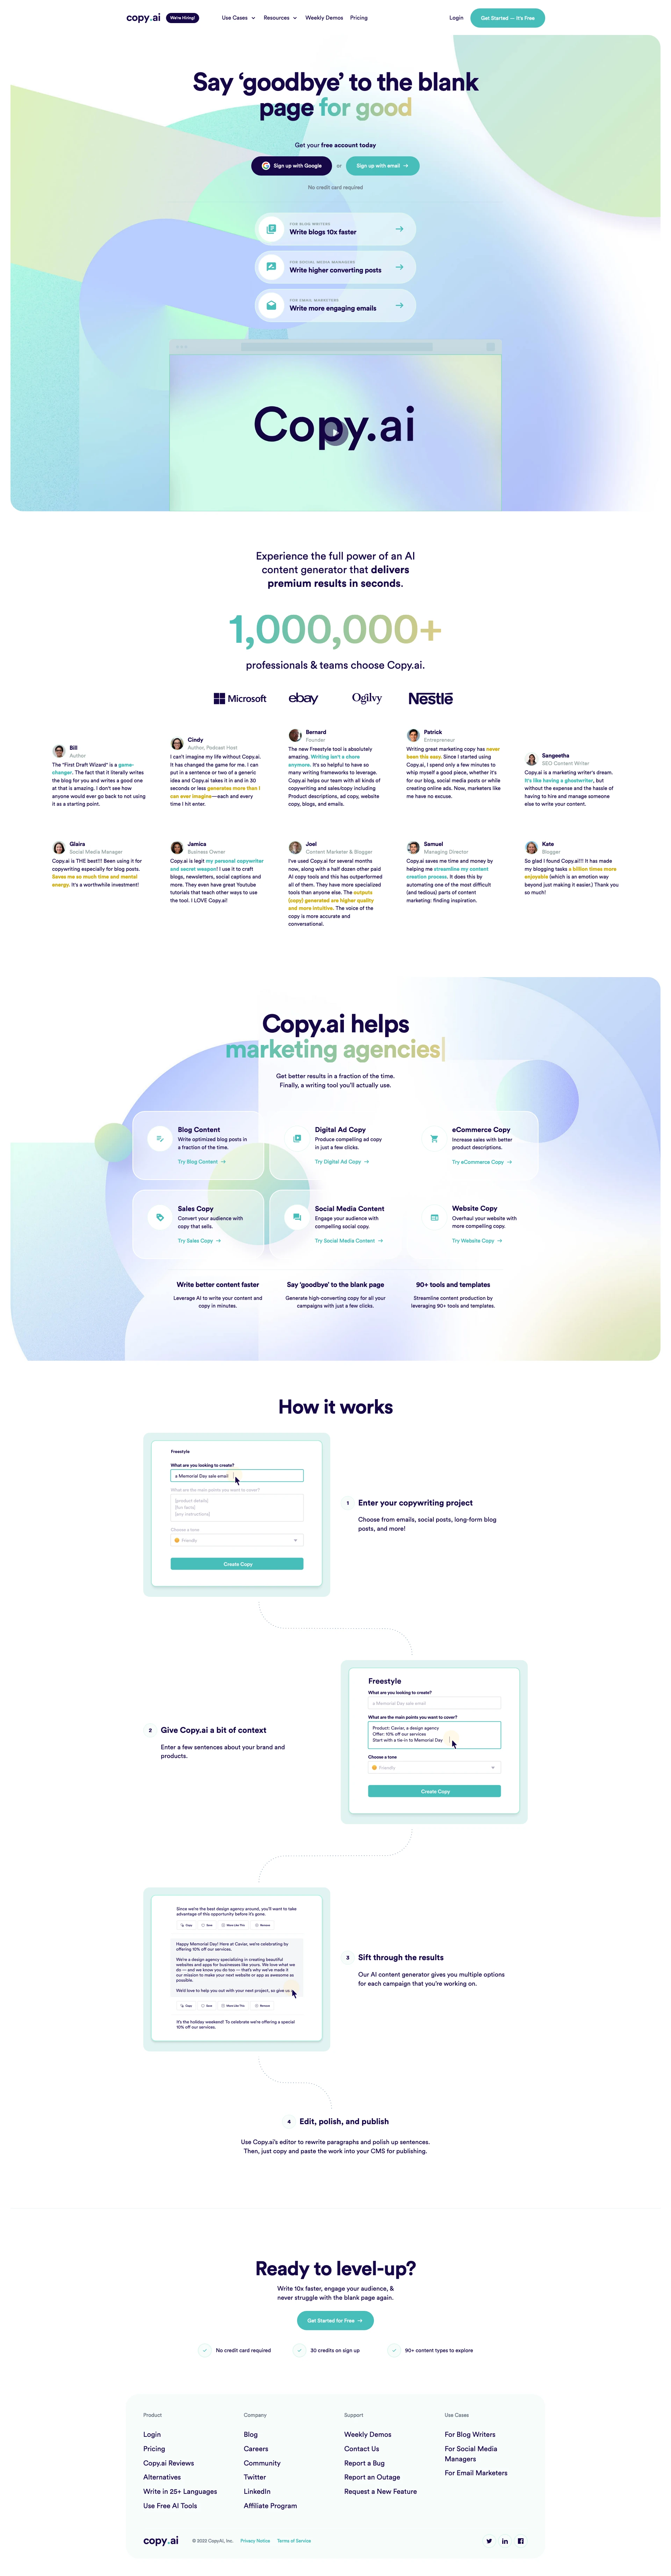 Copy.ai Landing Page Example: Get great copy that sells. Copy.ai is an AI-powered copywriter that generates high-quality copy for your business. Get started for free, no credit card required! Marketing simplified!